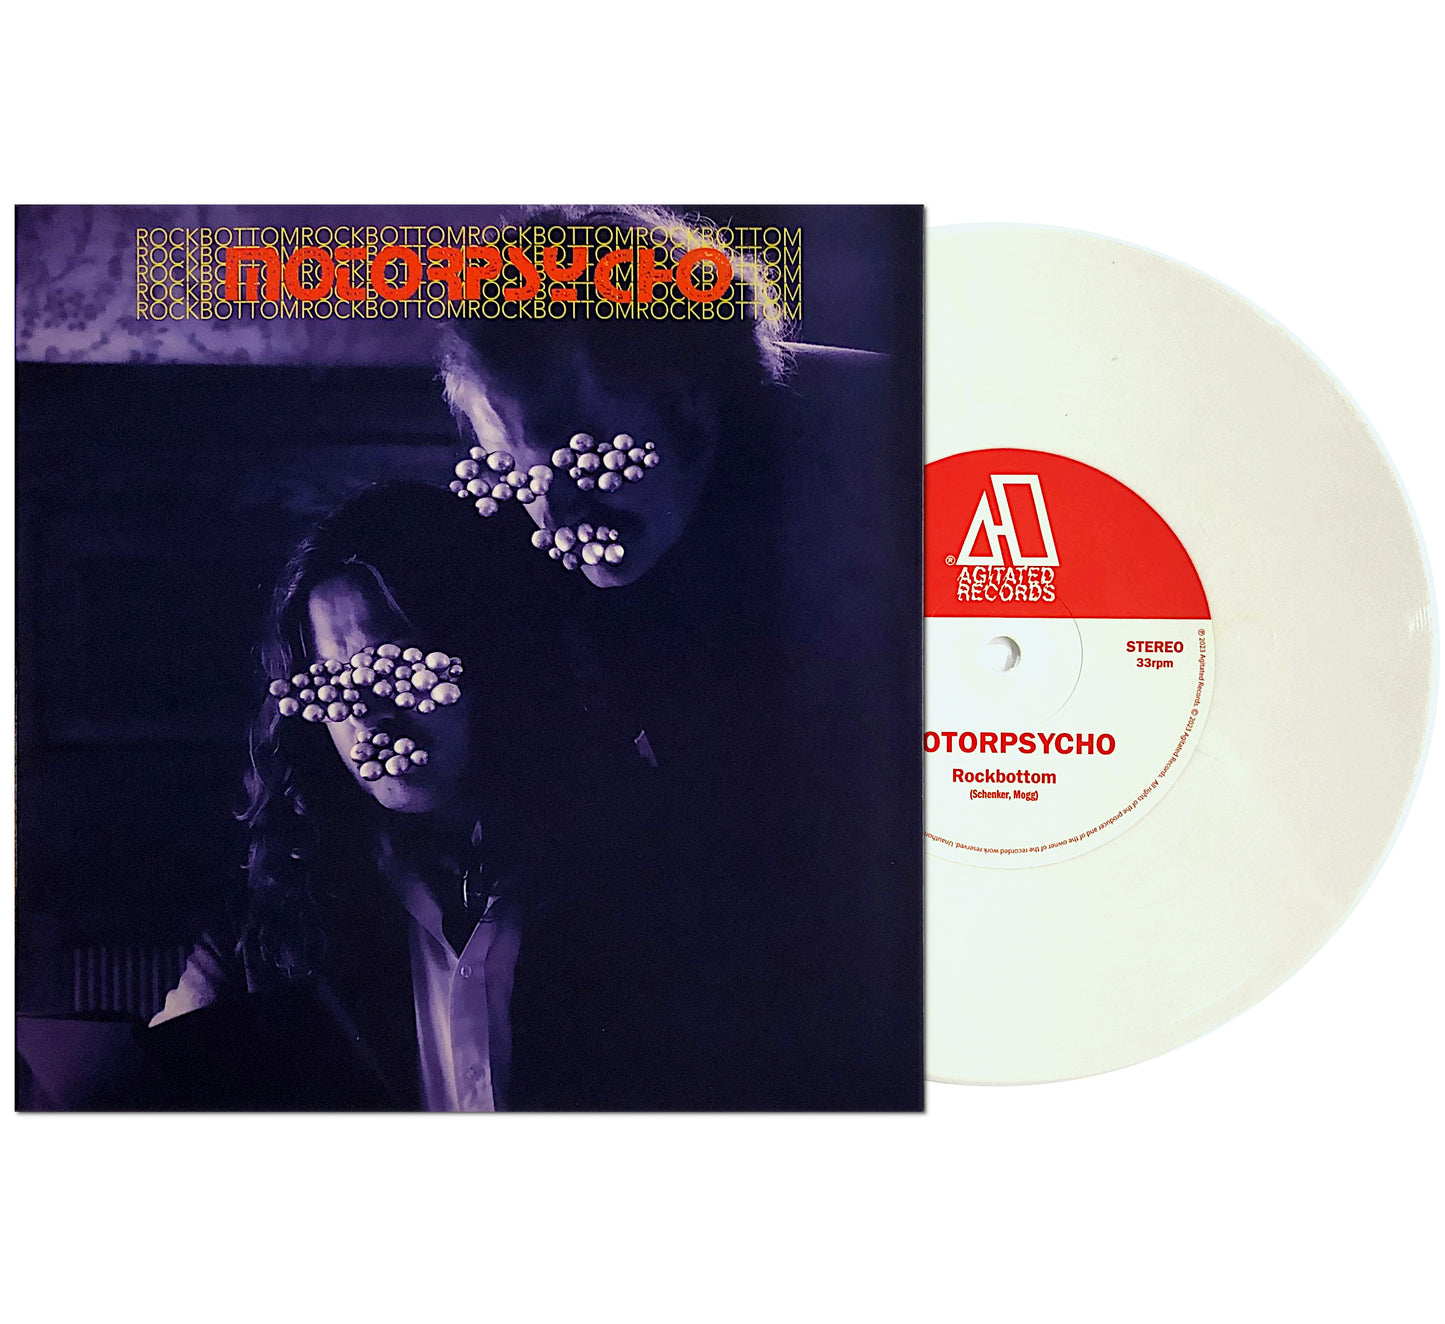 Arcade Sound - Motorpsycho - Rockbottom / Silver Dollar Forger front cover